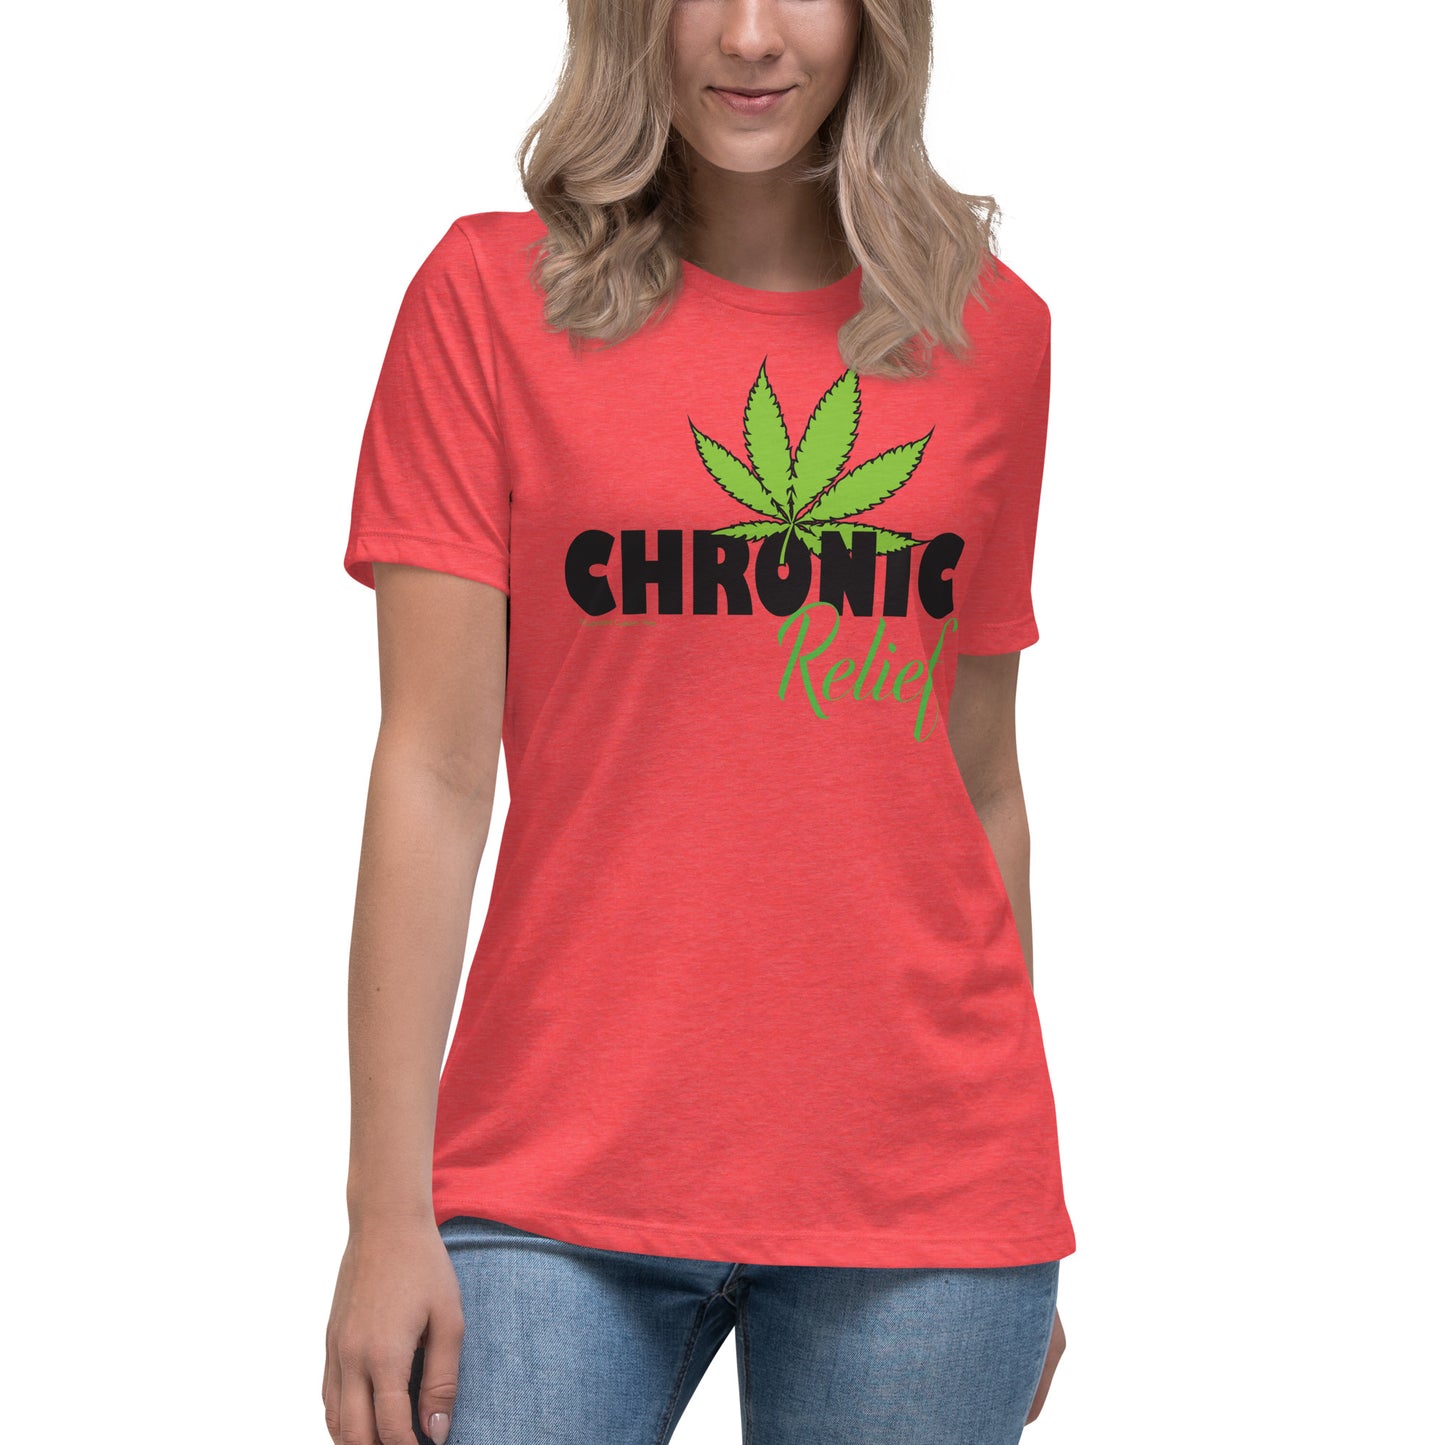 Chronic Relief P404 Women's Relaxed T-Shirt